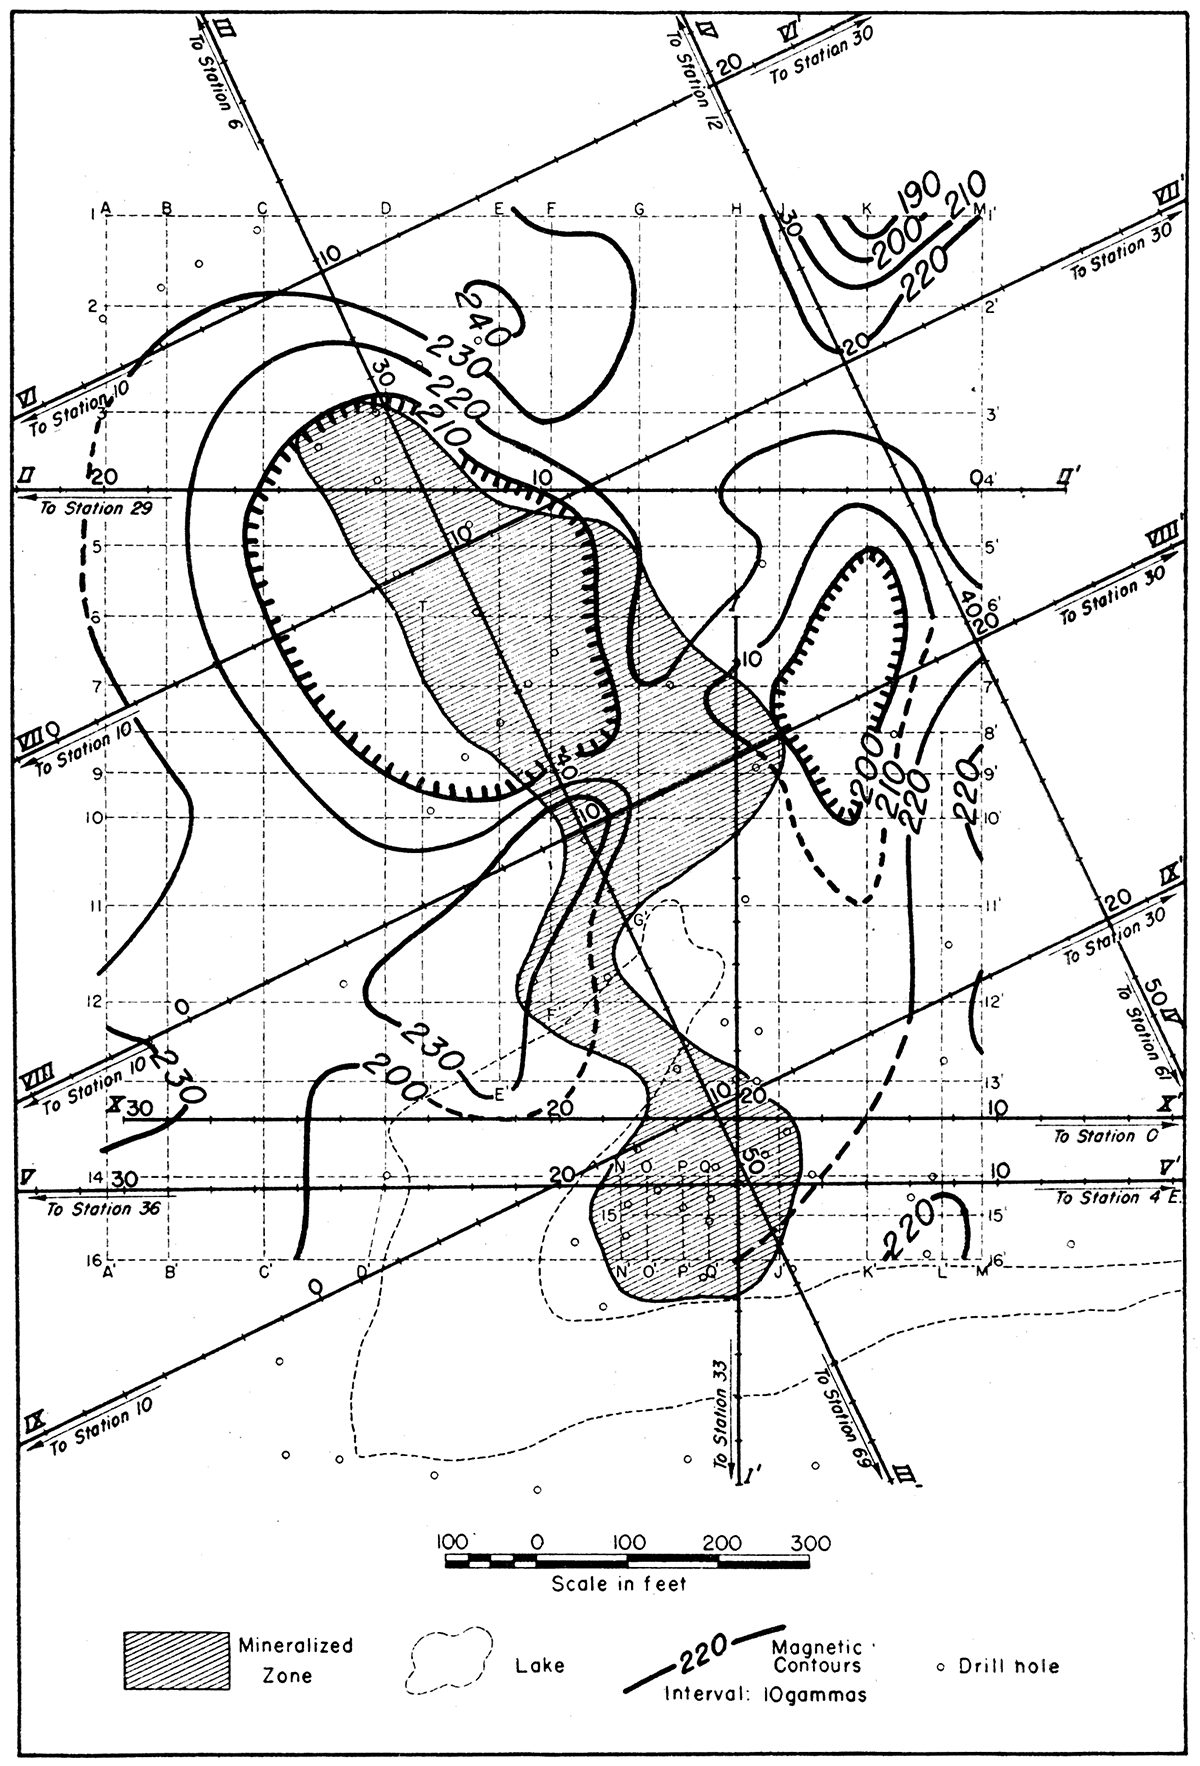 Map showing magnetic contours in the Walton area.